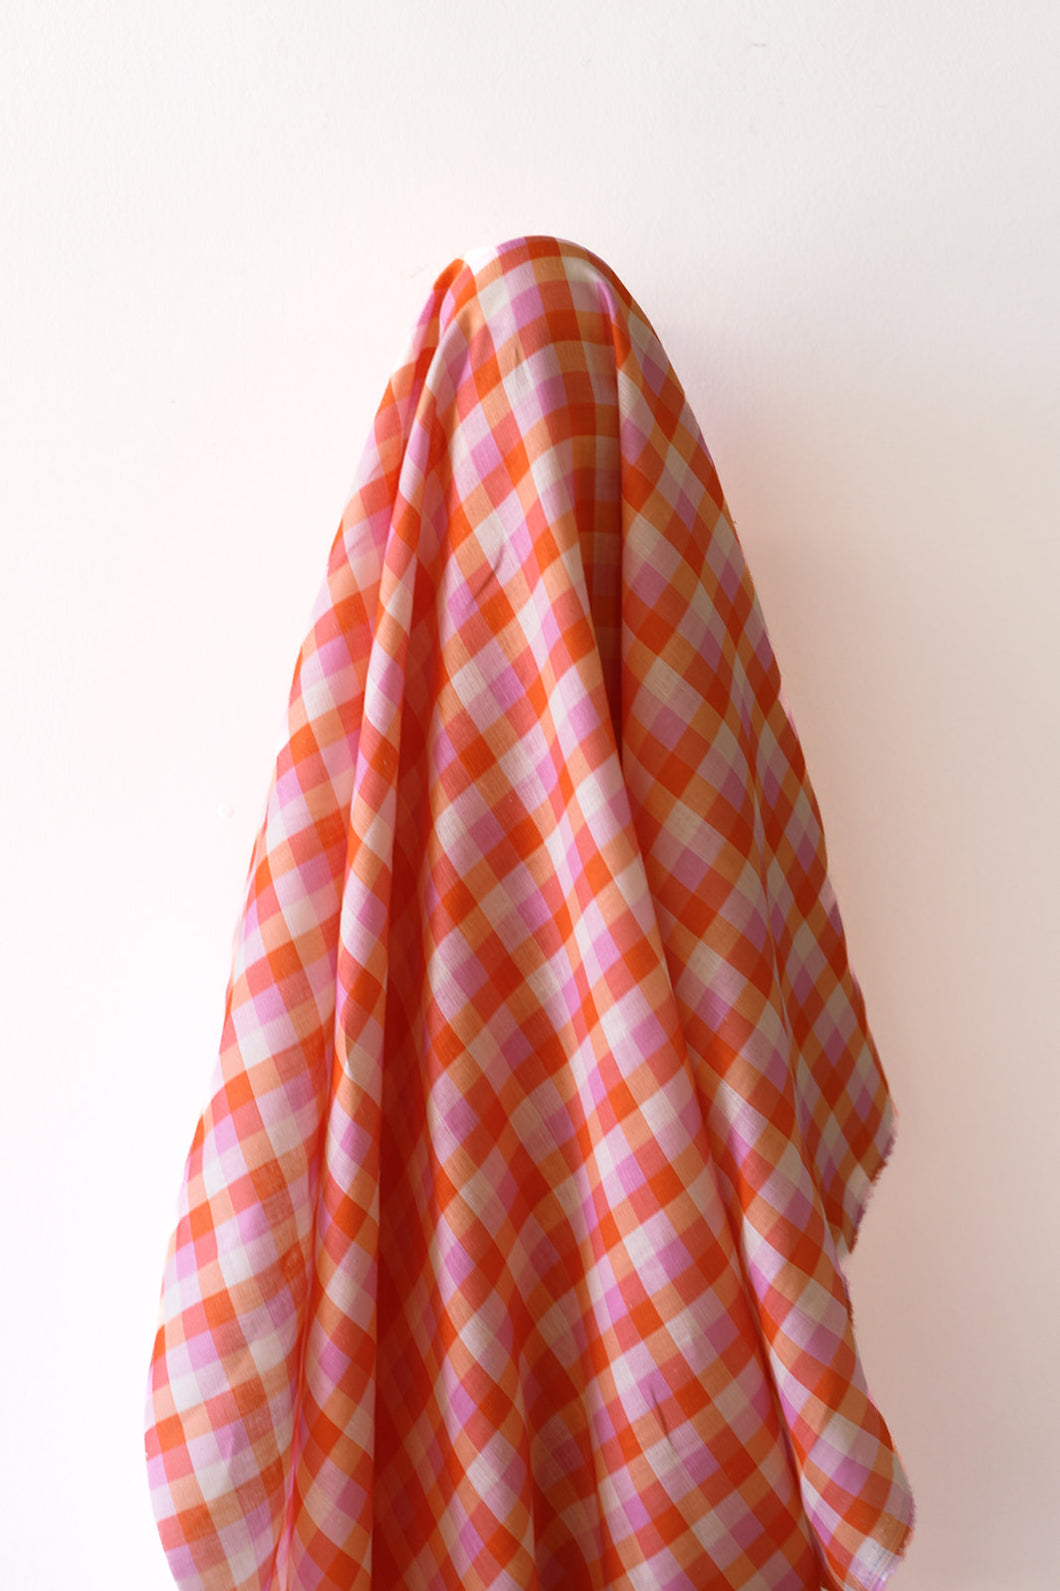 Summer Vibes 100% Cotton Lawn Gingham 142 cm wide $28 pm